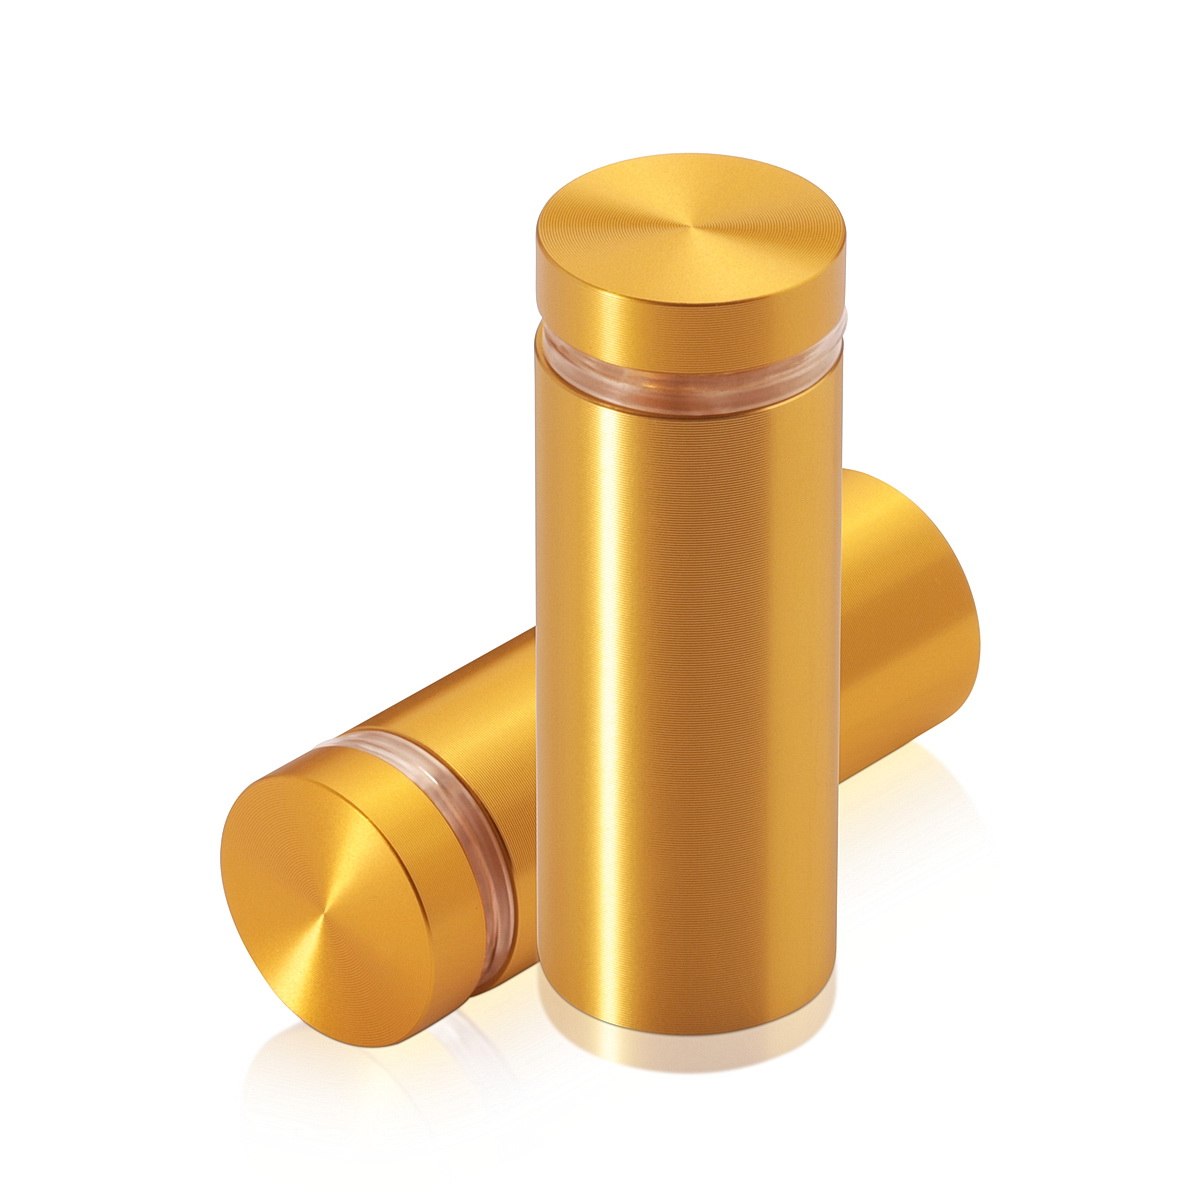 3/4'' Diameter X 1-3/4'' Barrel Length, Aluminum Flat Head Standoffs, Gold Anodized Finish Easy Fasten Standoff (For Inside / Outside use) Tamper Proof Standoff [Required Material Hole Size: 7/16'']